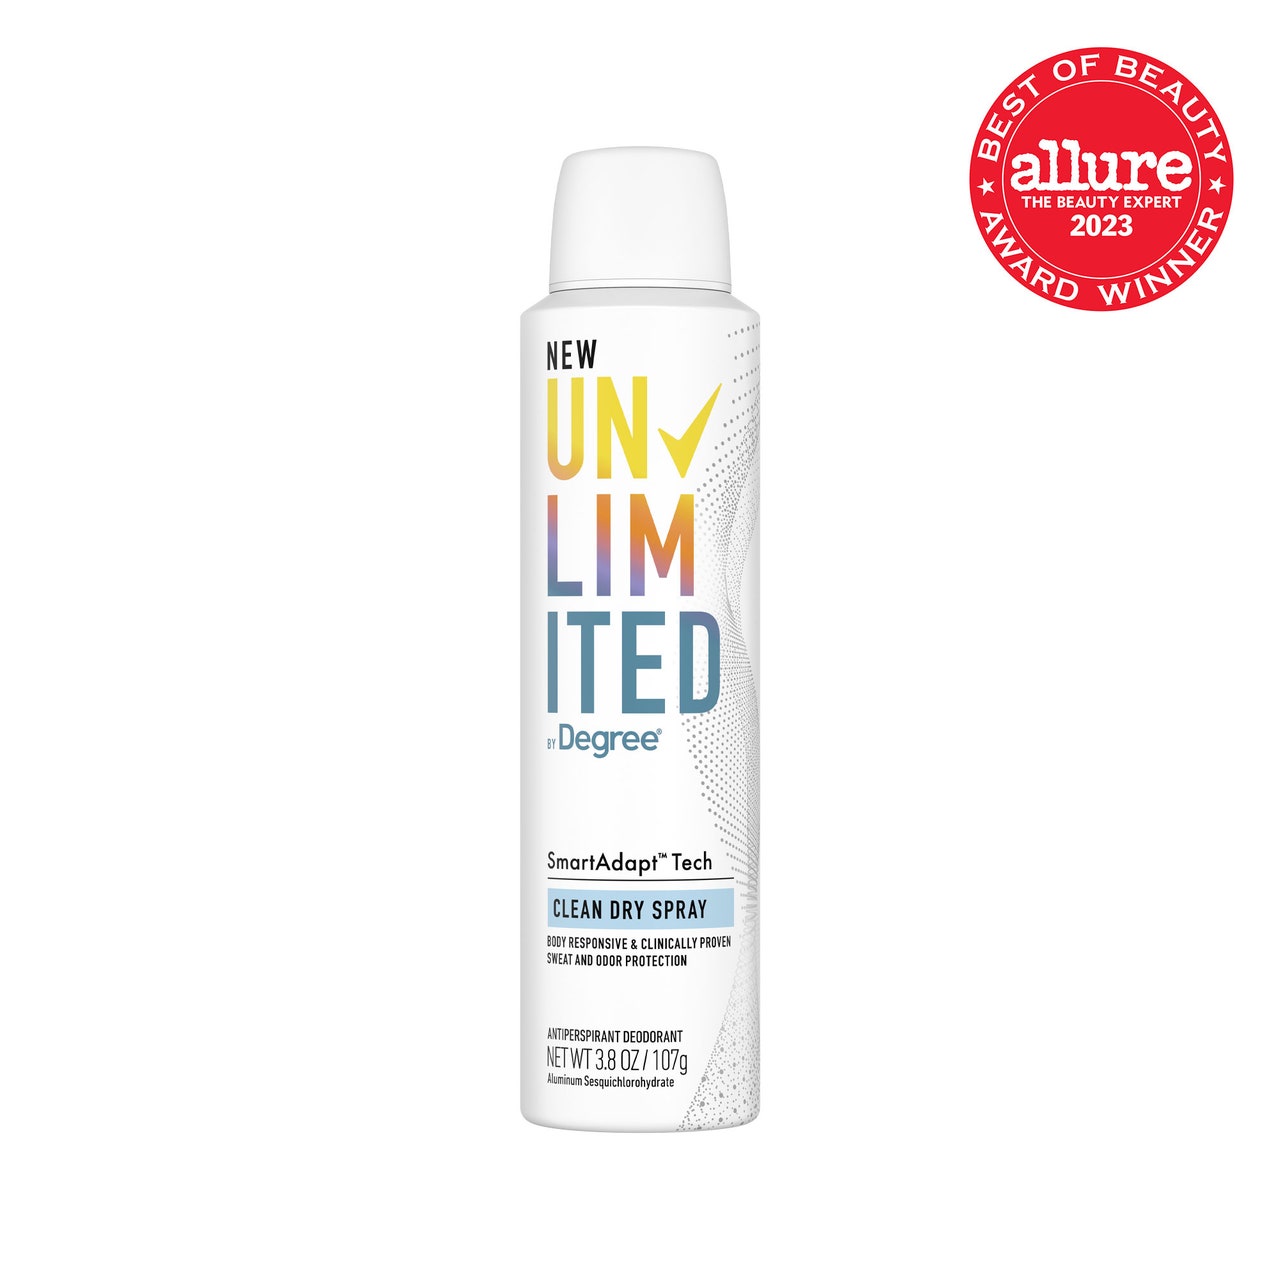 Unlimited by Degree SmartAdapt Tech Clean Dry Spray white spray canister on white background with red Allure BoB seal in the top right corner